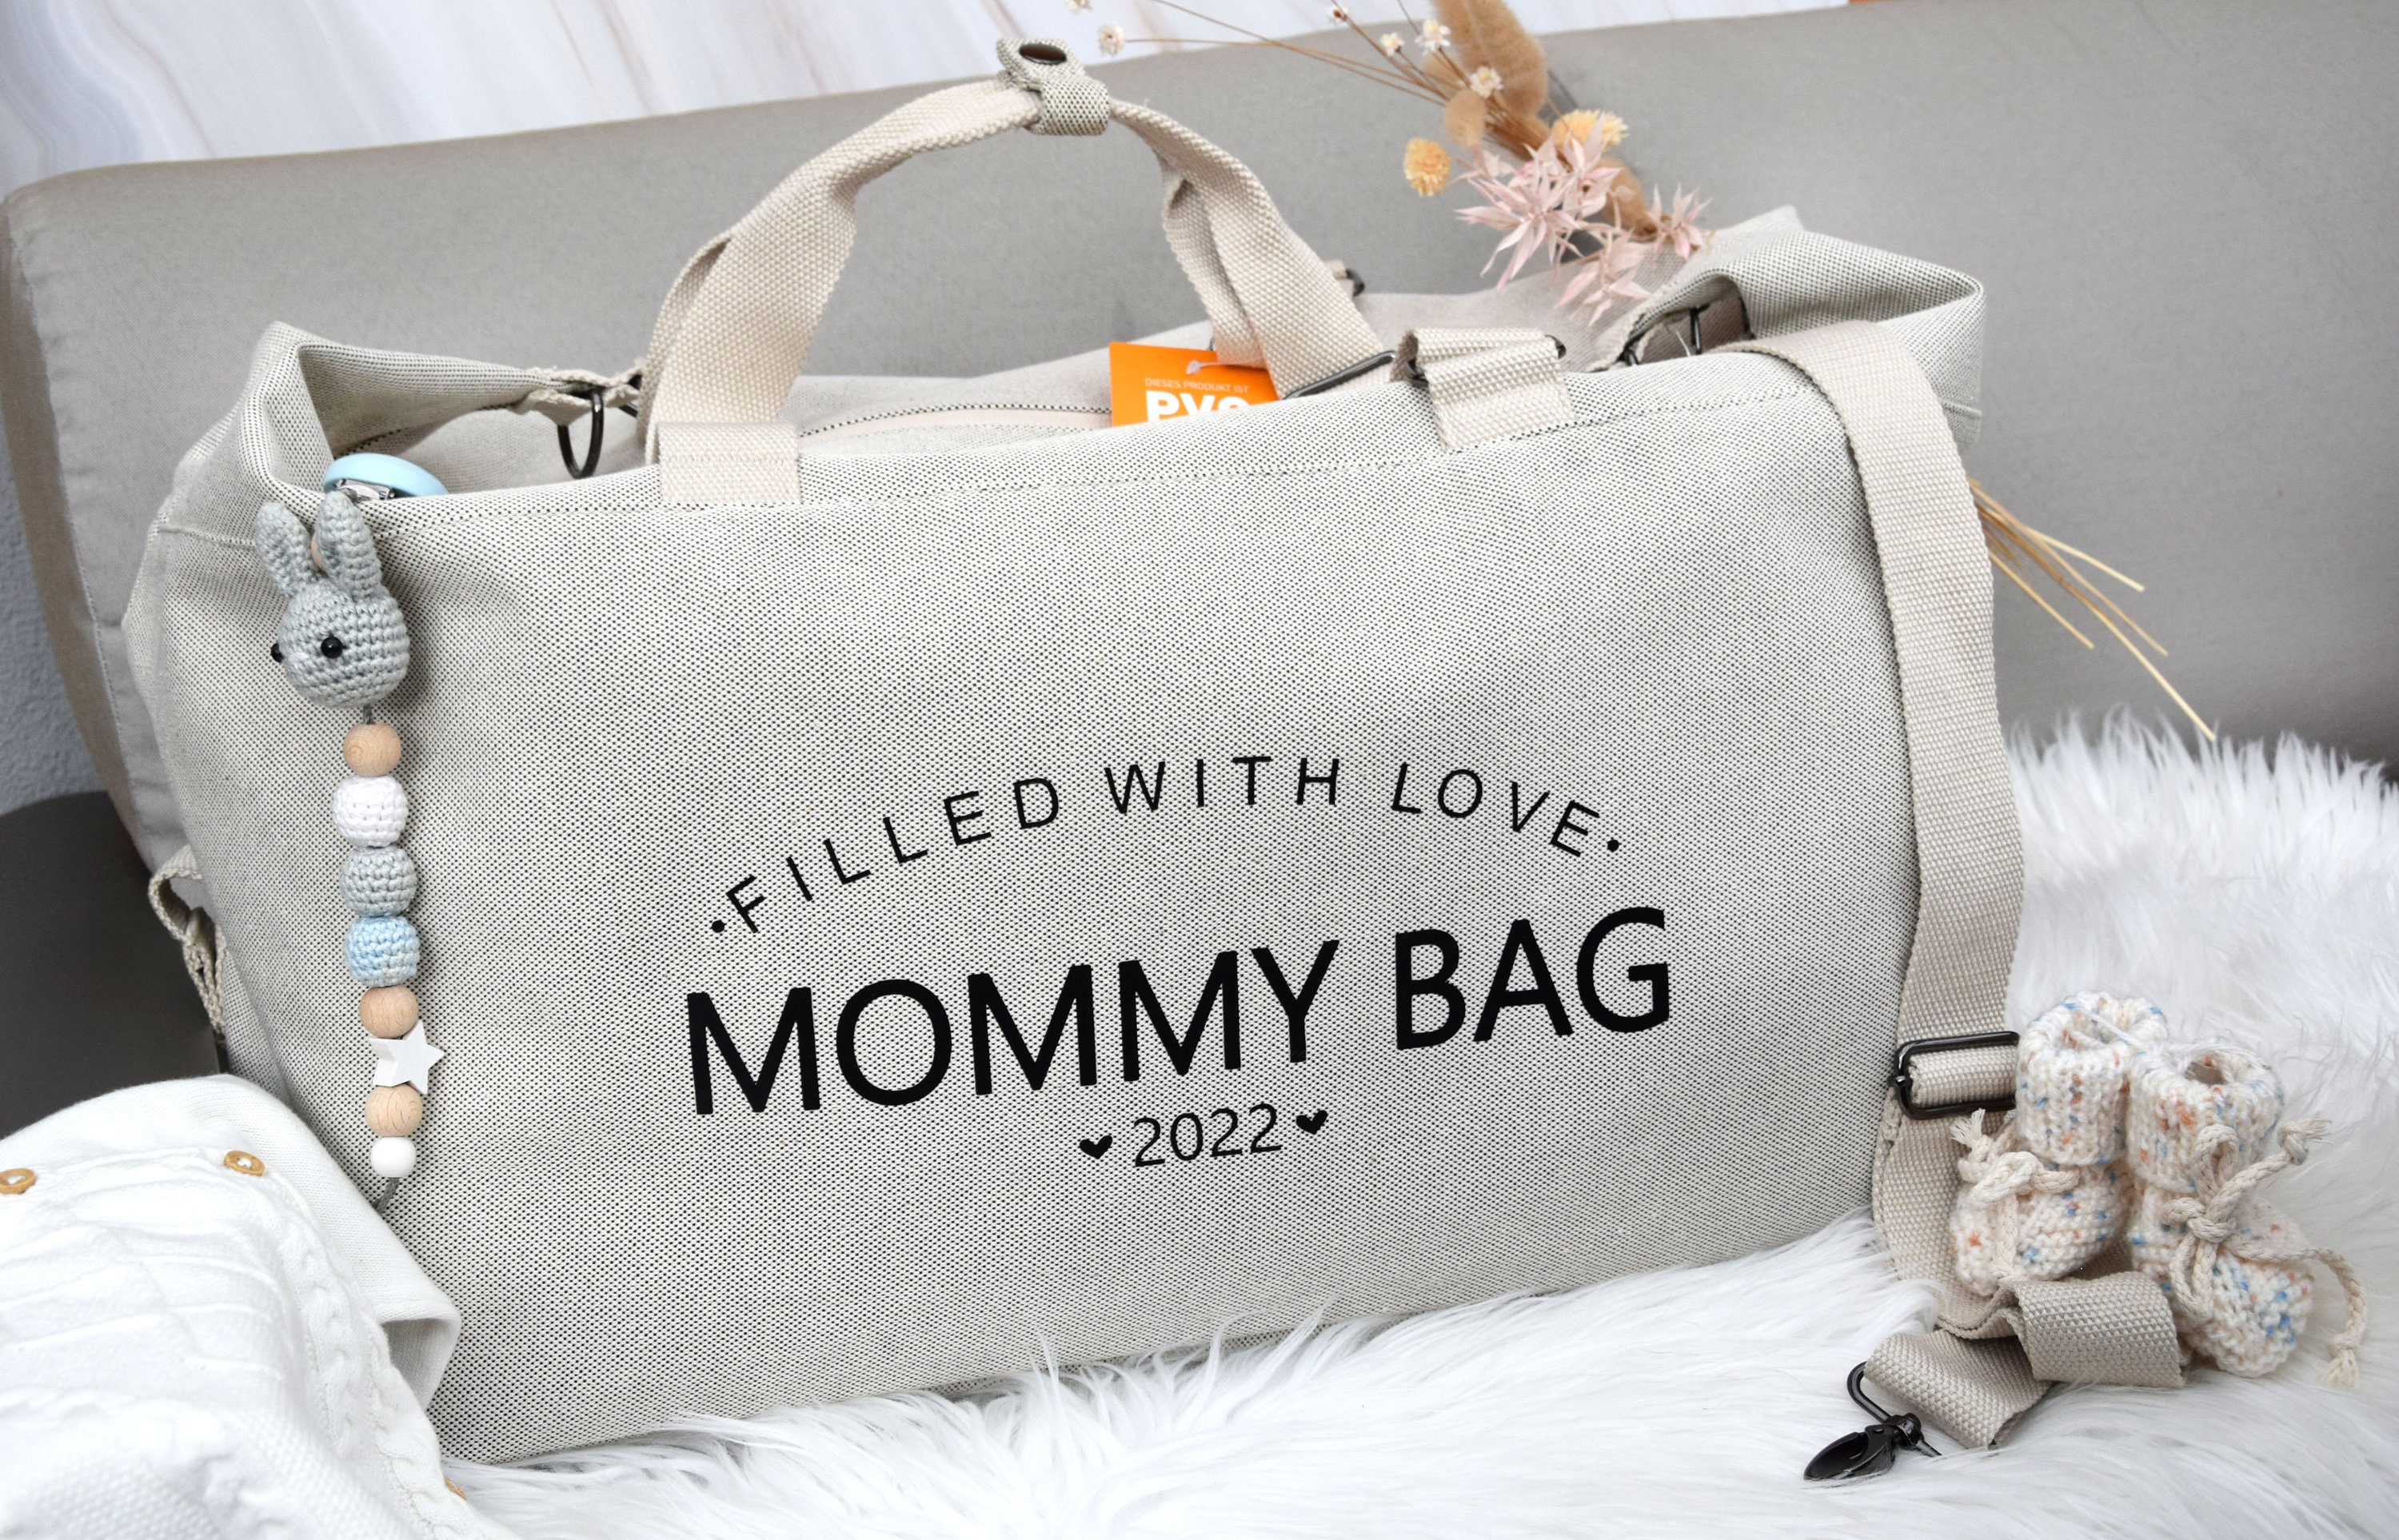 Family Mommy Bag, Mom Bag, Hospital Bag, Birth Gift, Travel Bag, Shoulder  Bag Personalized With Name and Year of Birth, Baby -  Sweden